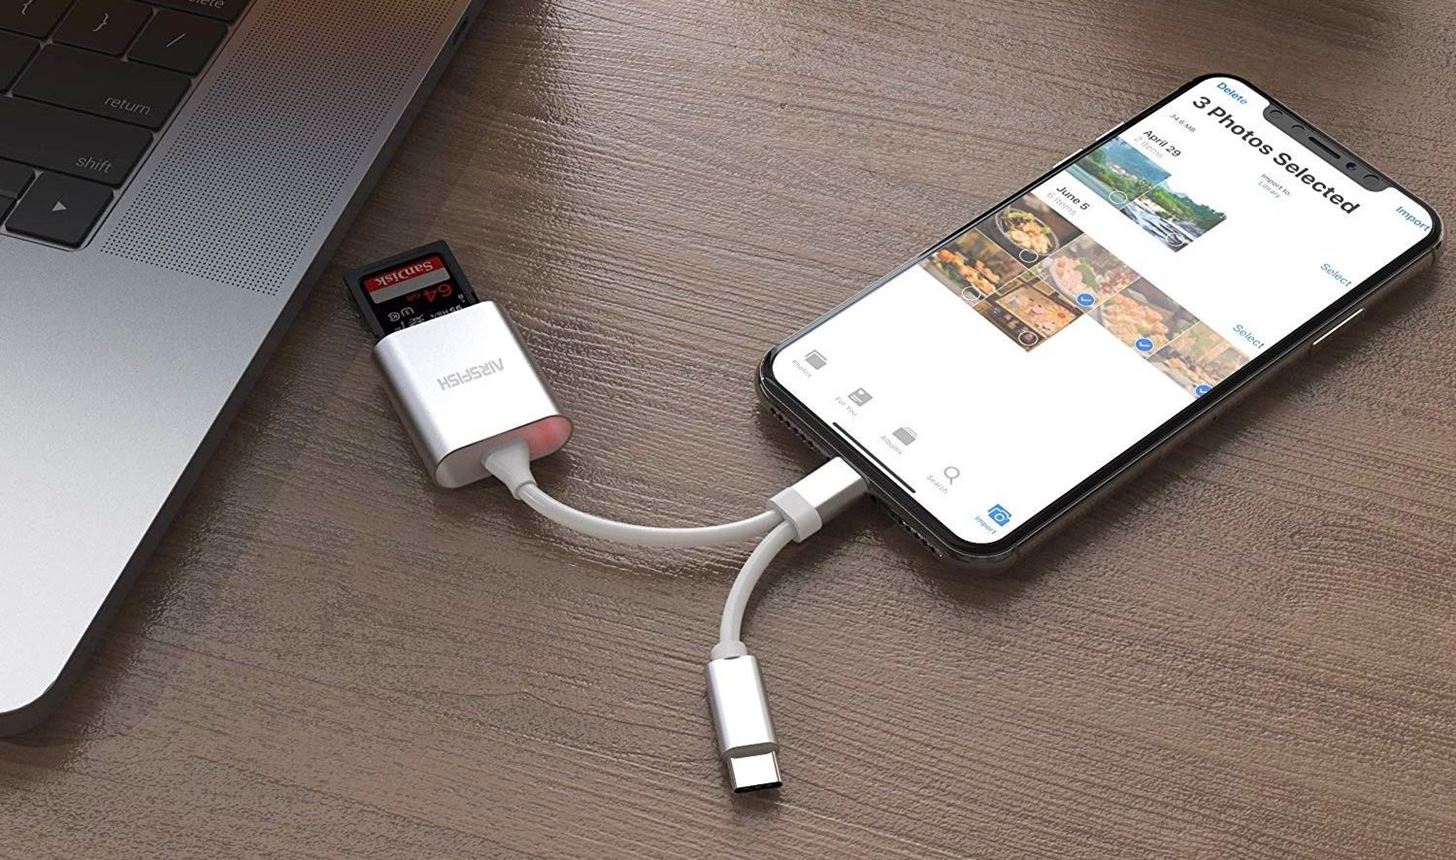 The Best External Storage Options for iPhone That Work with iOS 13's Files App